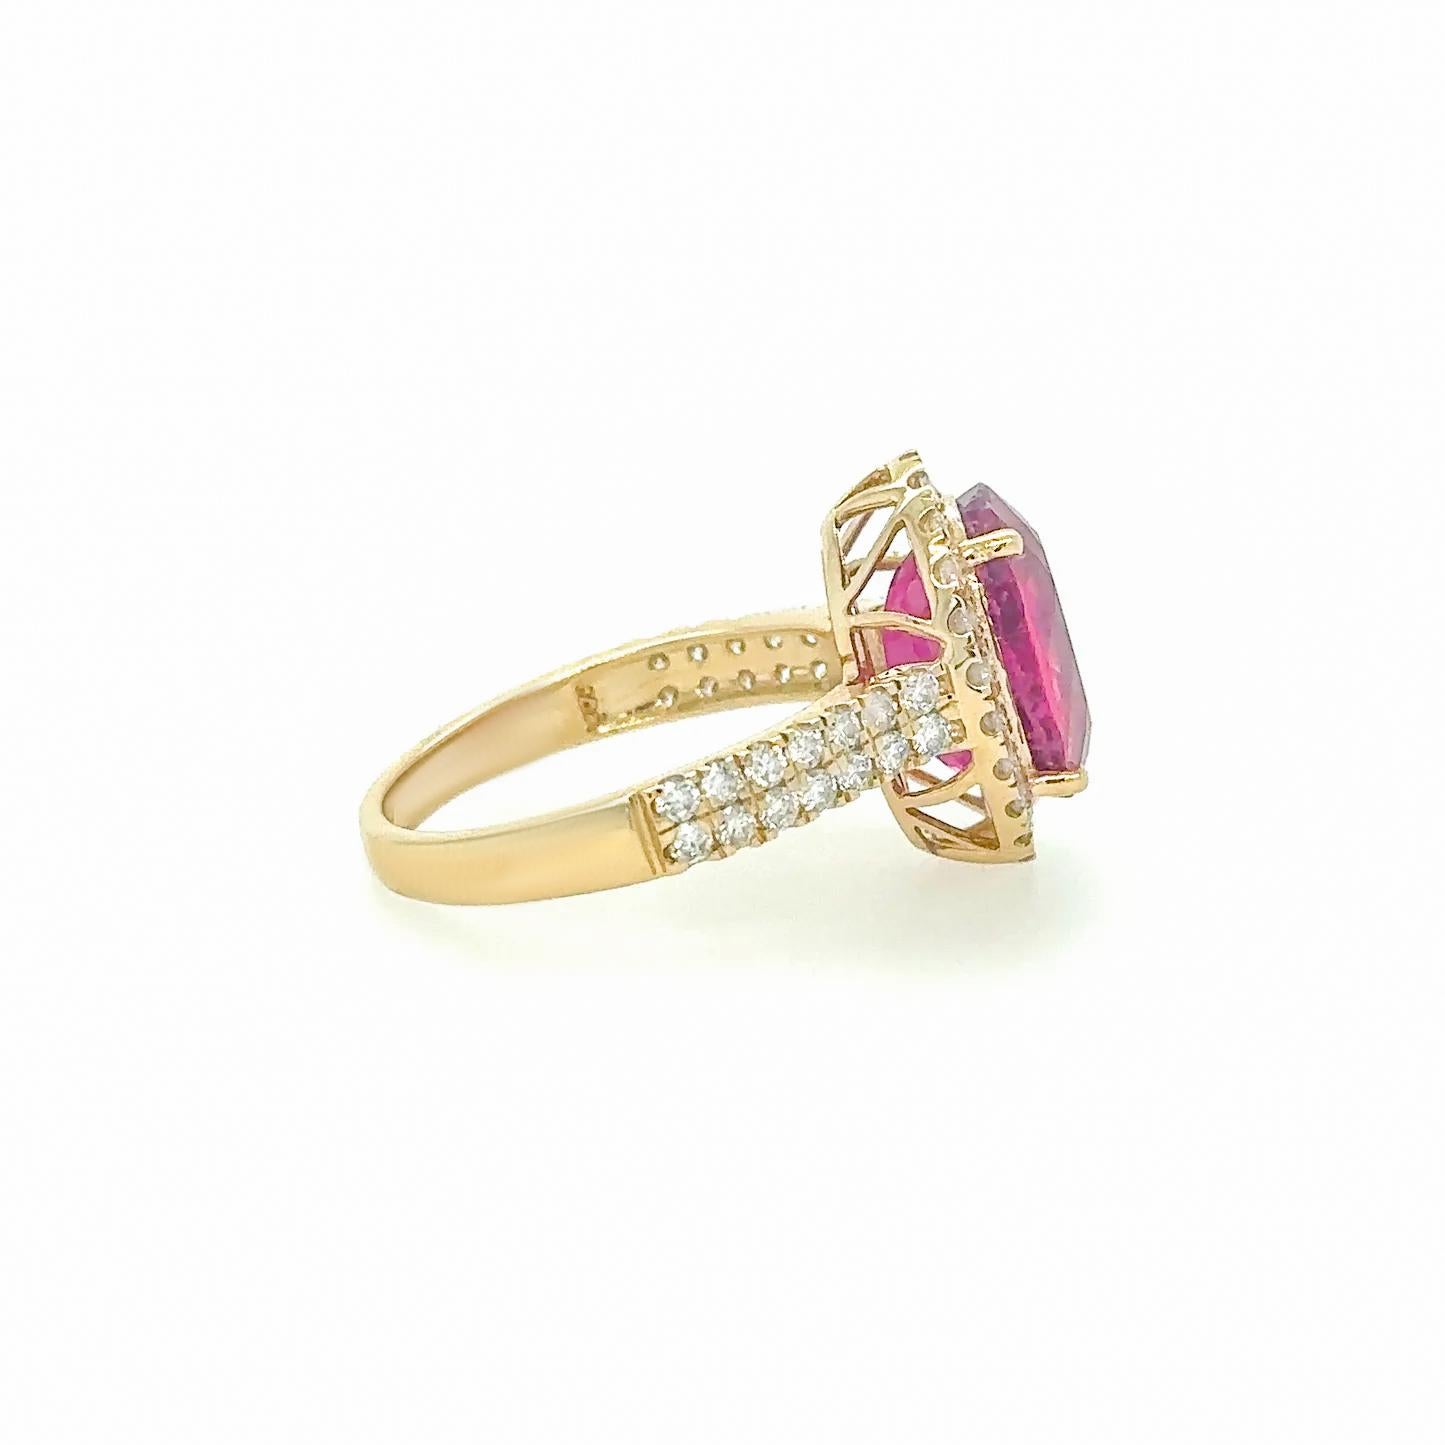 Rubellite Ring With Diamonds 4.48 Carats 14K Yellow Gold In Excellent Condition For Sale In Laguna Niguel, CA